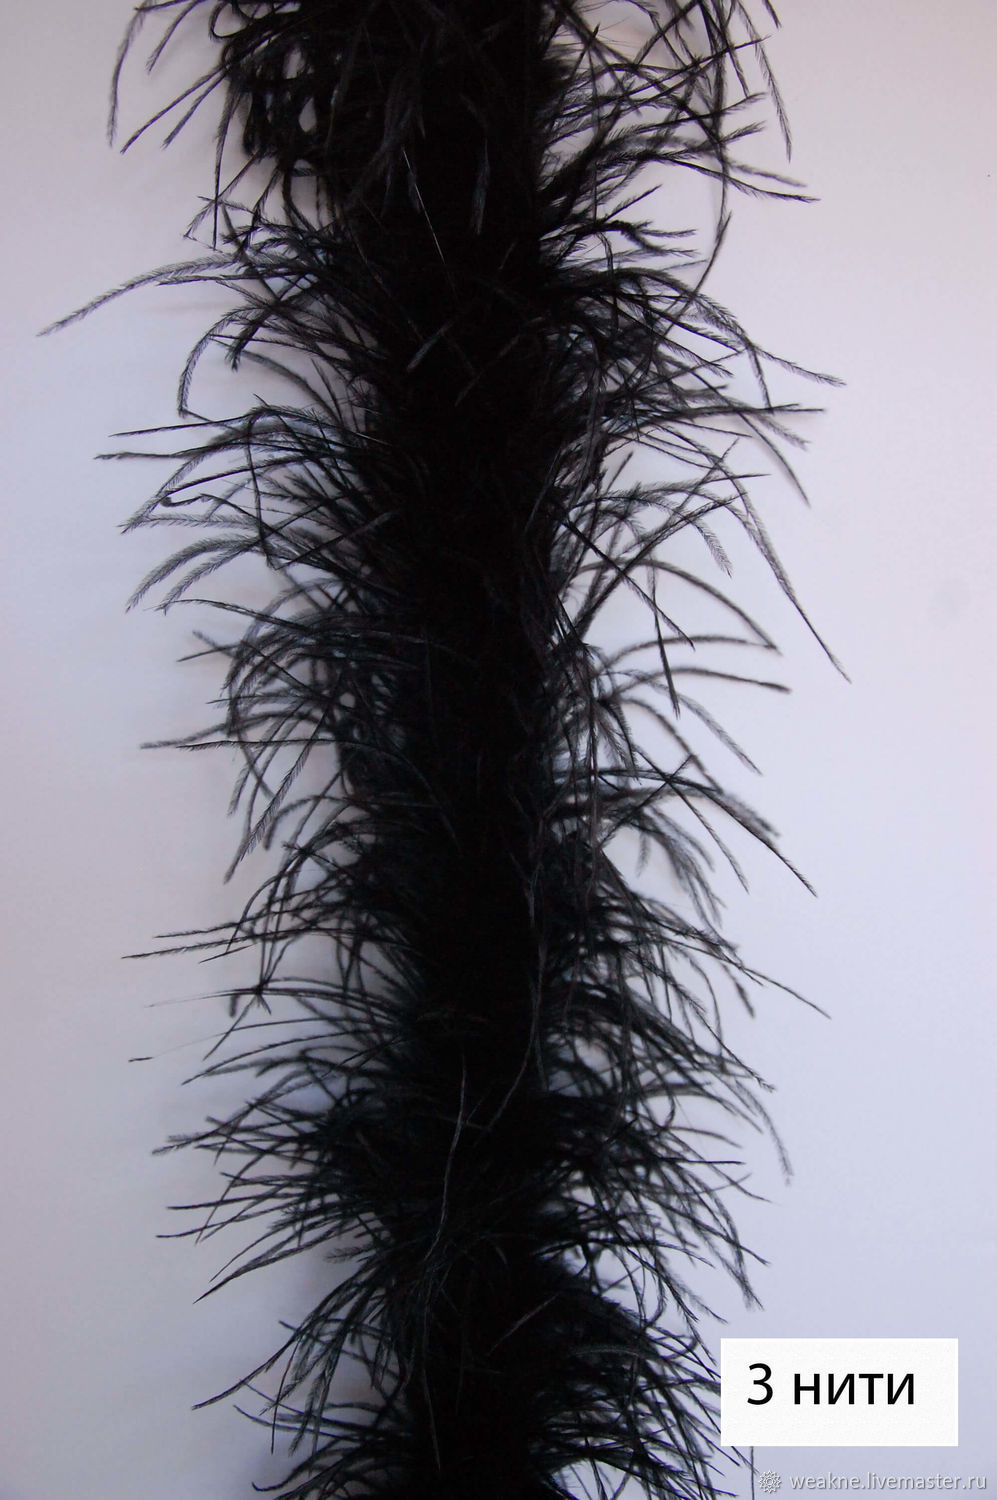 Ostrich feather boa 1.8 m black - 3 strands (three-stranded), Sewing accessories, Moscow,  Фото №1